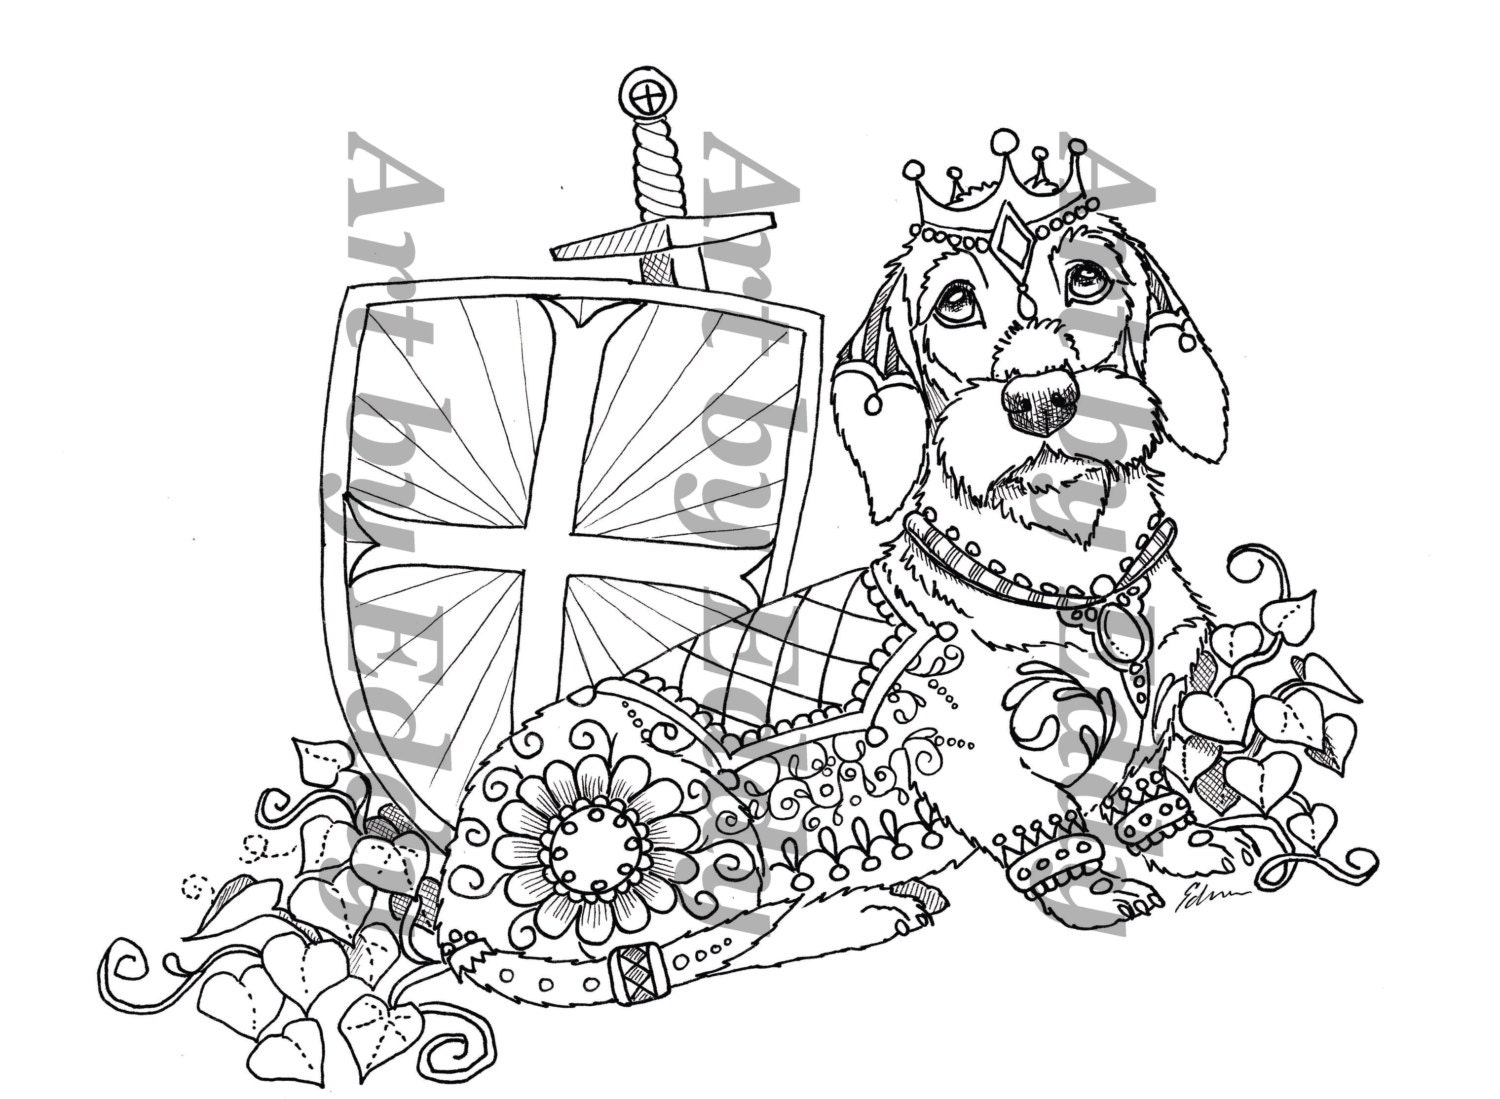 Art of Dachshund Coloring Book Volume No. 2 Physical by ...